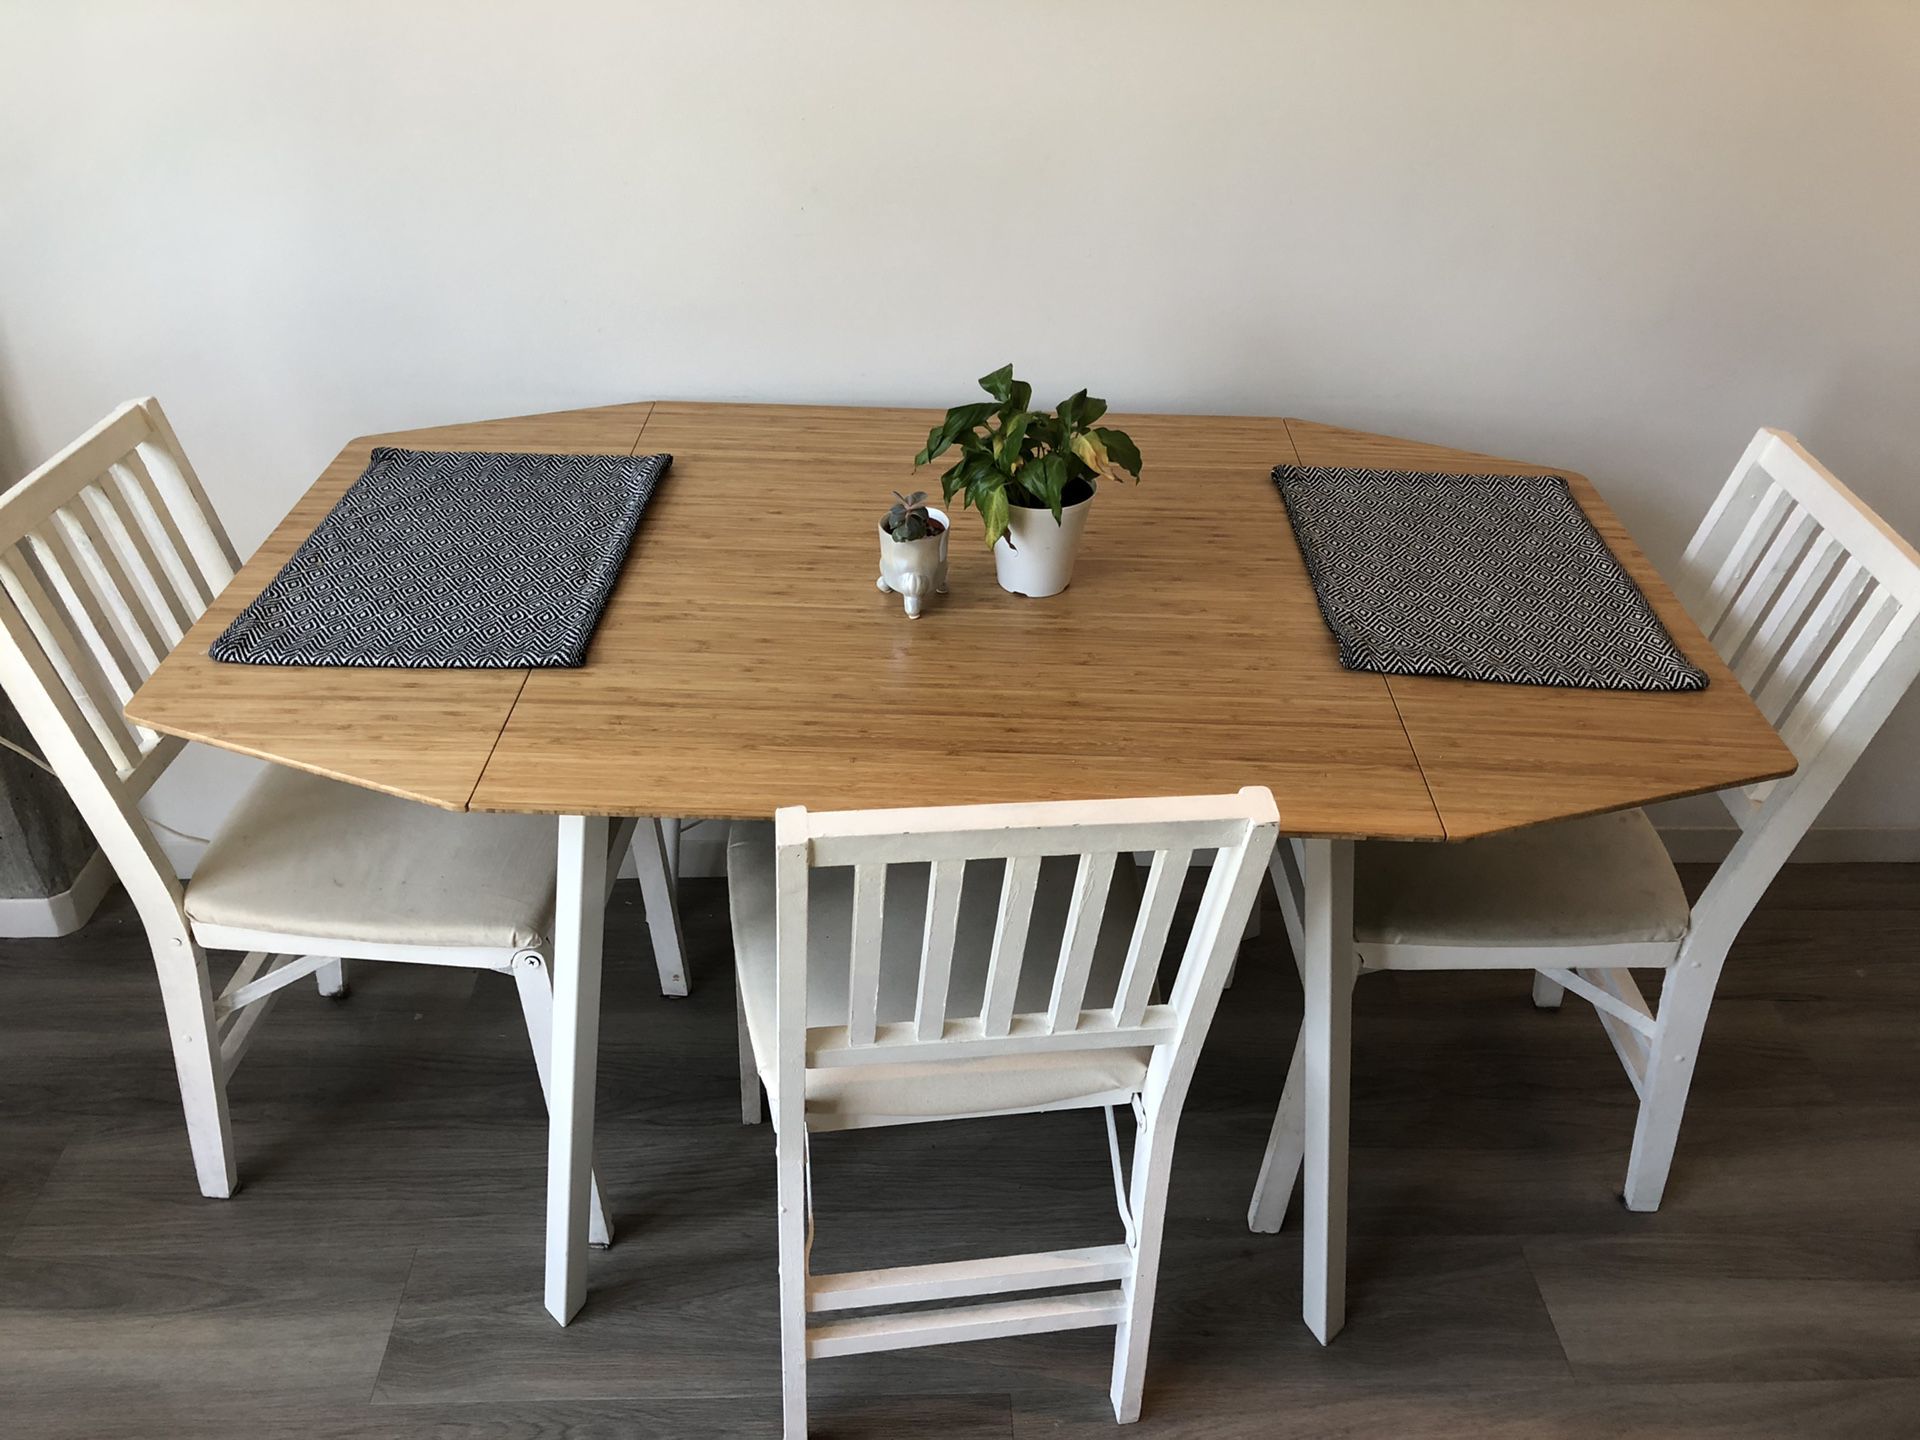 Dining table set - drop leaf table and foldable wooden chairs